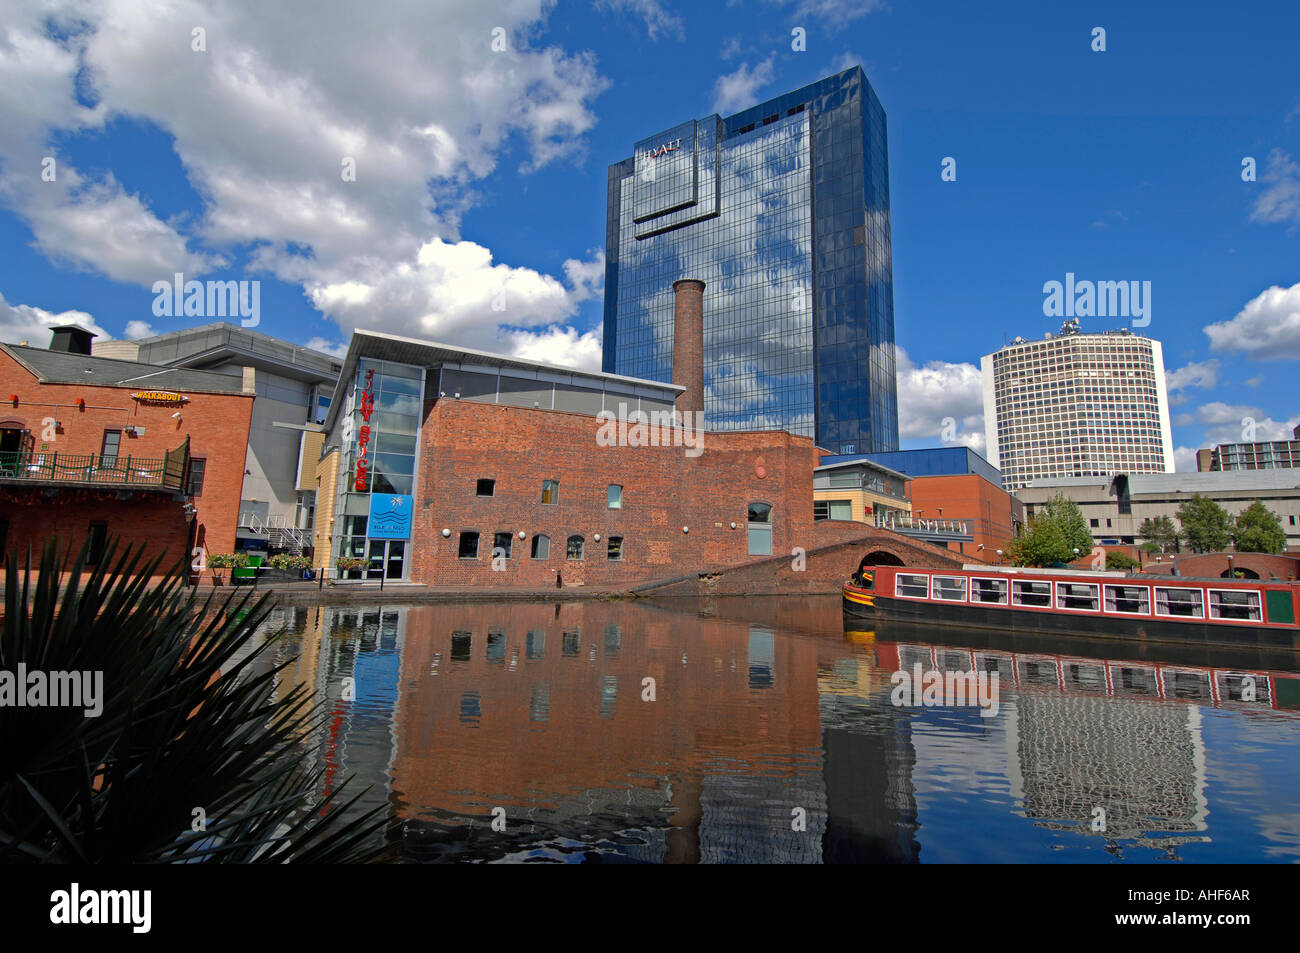 Gas Street Basin, Birmingham UK, showing  the towpath with the Hyatt Hotel in the distance. Stock Photo